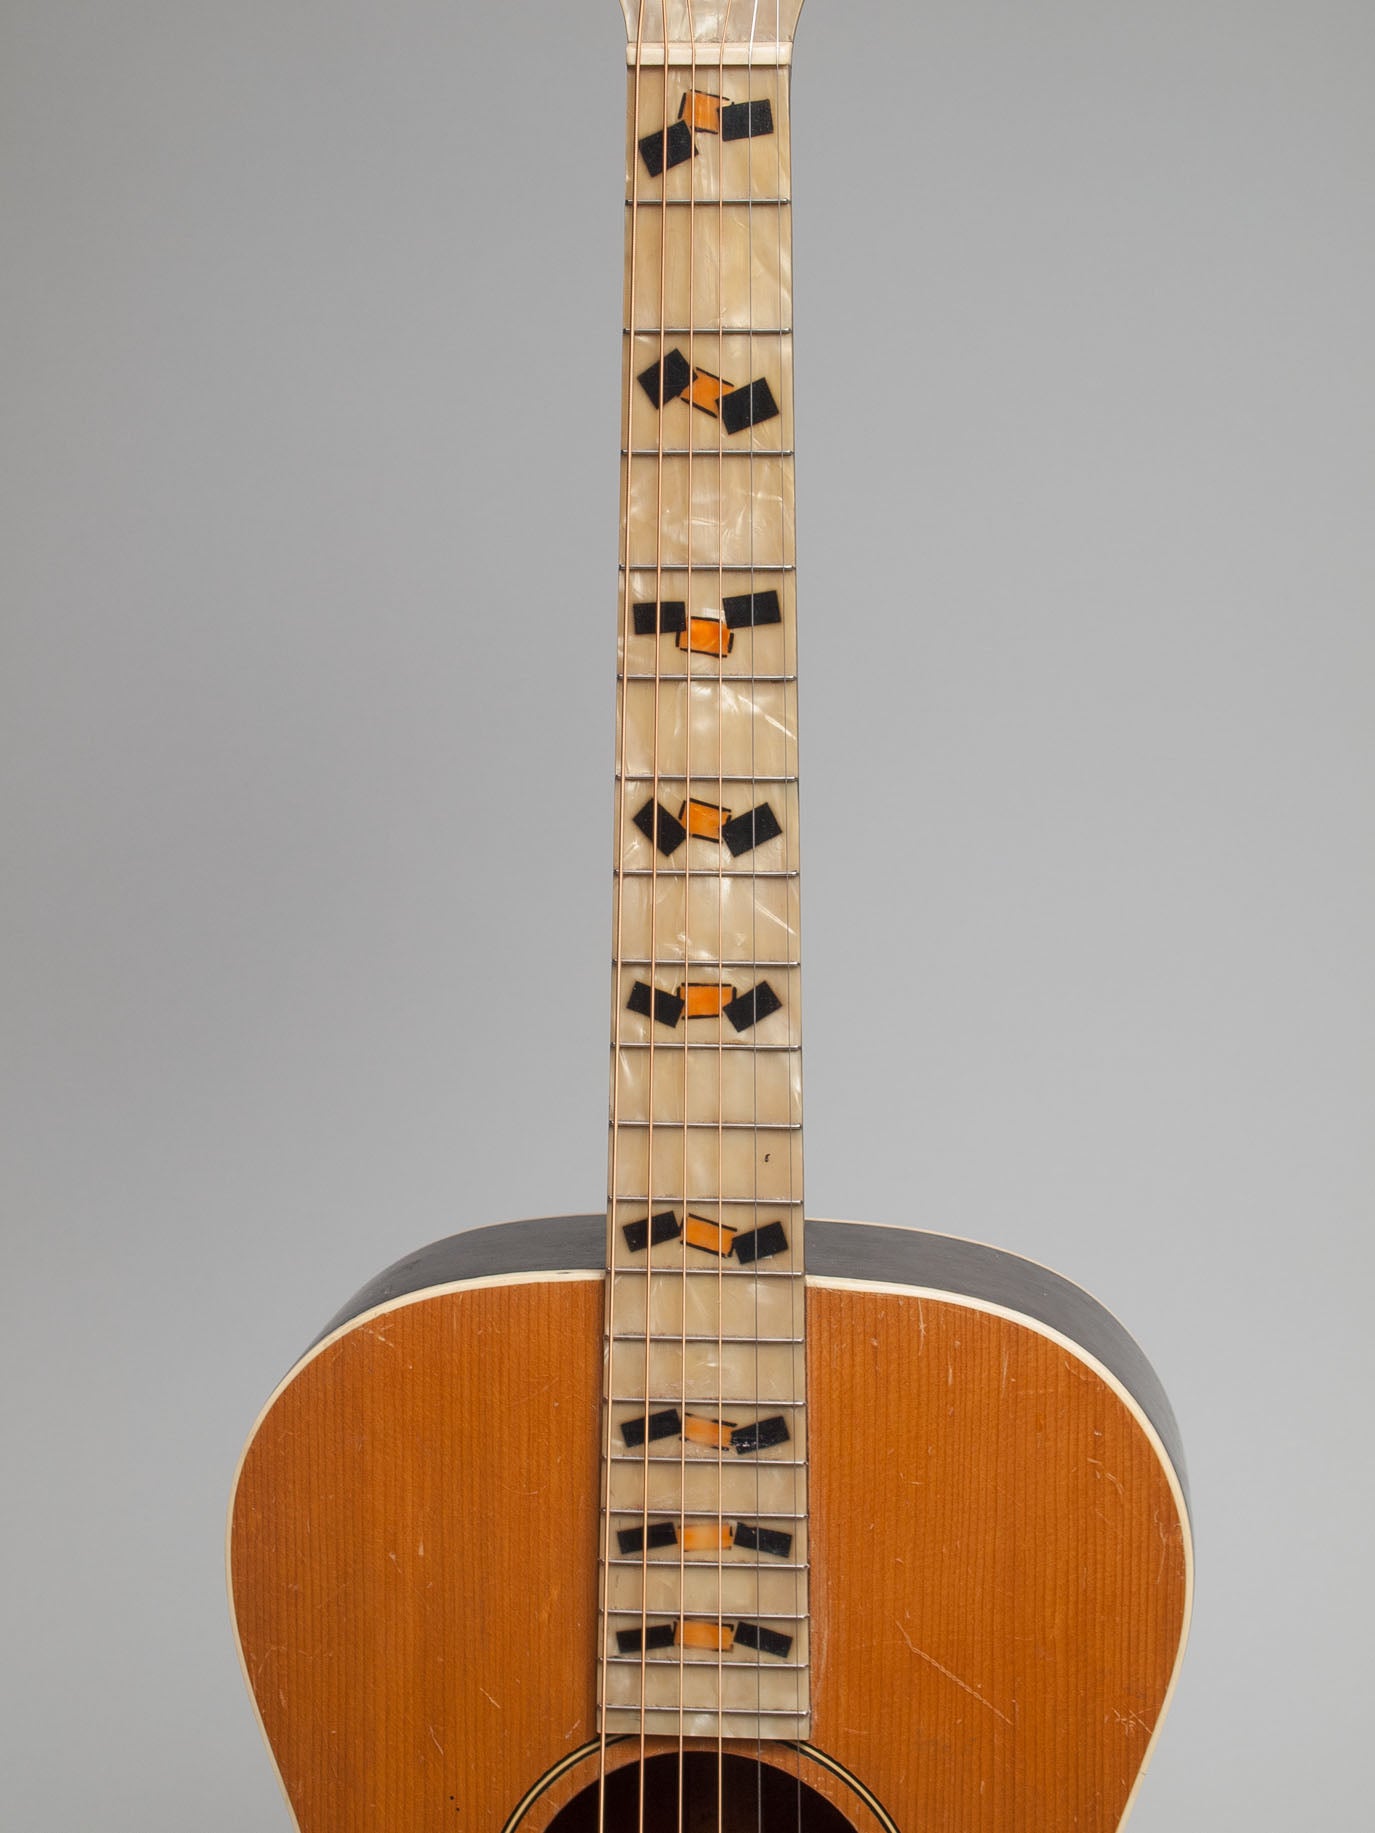 1930 Gibson Marshall Special